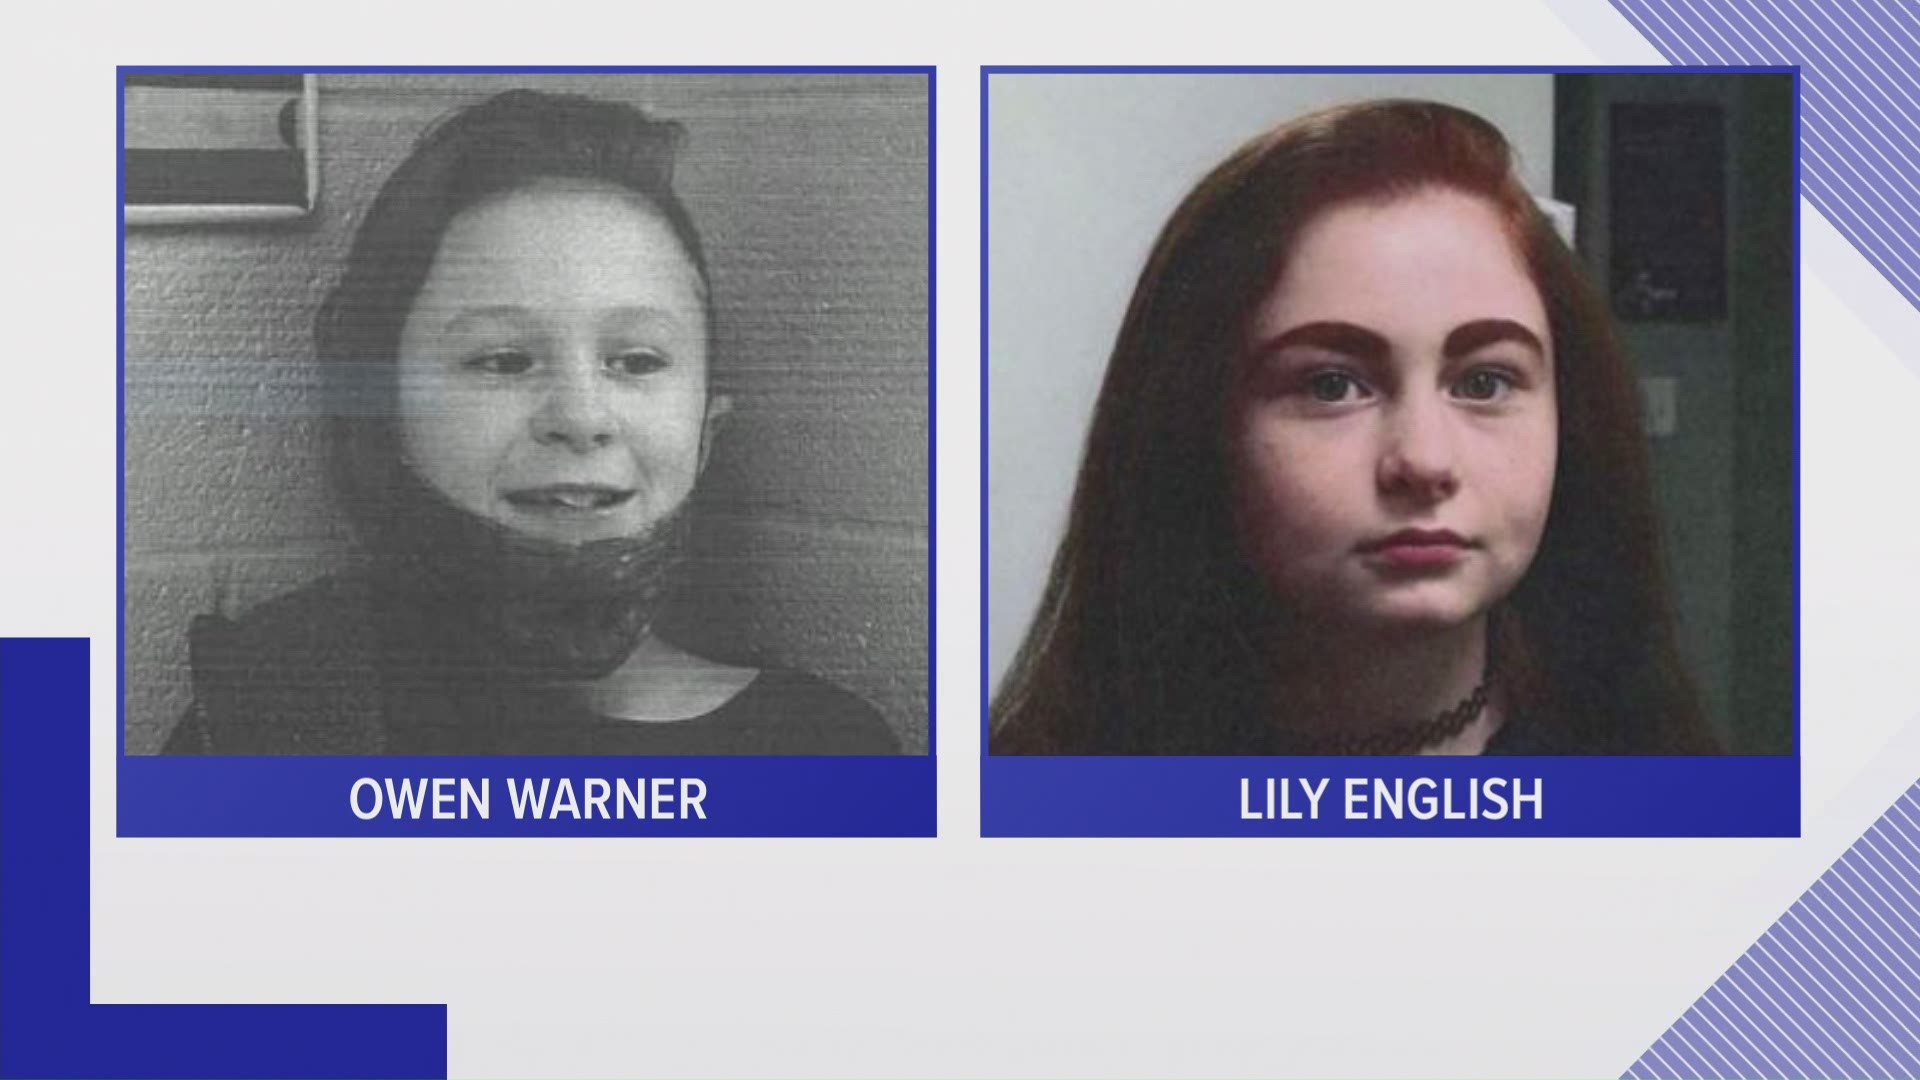 The Niagara County sheriff's office is looking for help finding two missing children tonight.
12-year-old Owen Warner and 14-year-old Lily English.